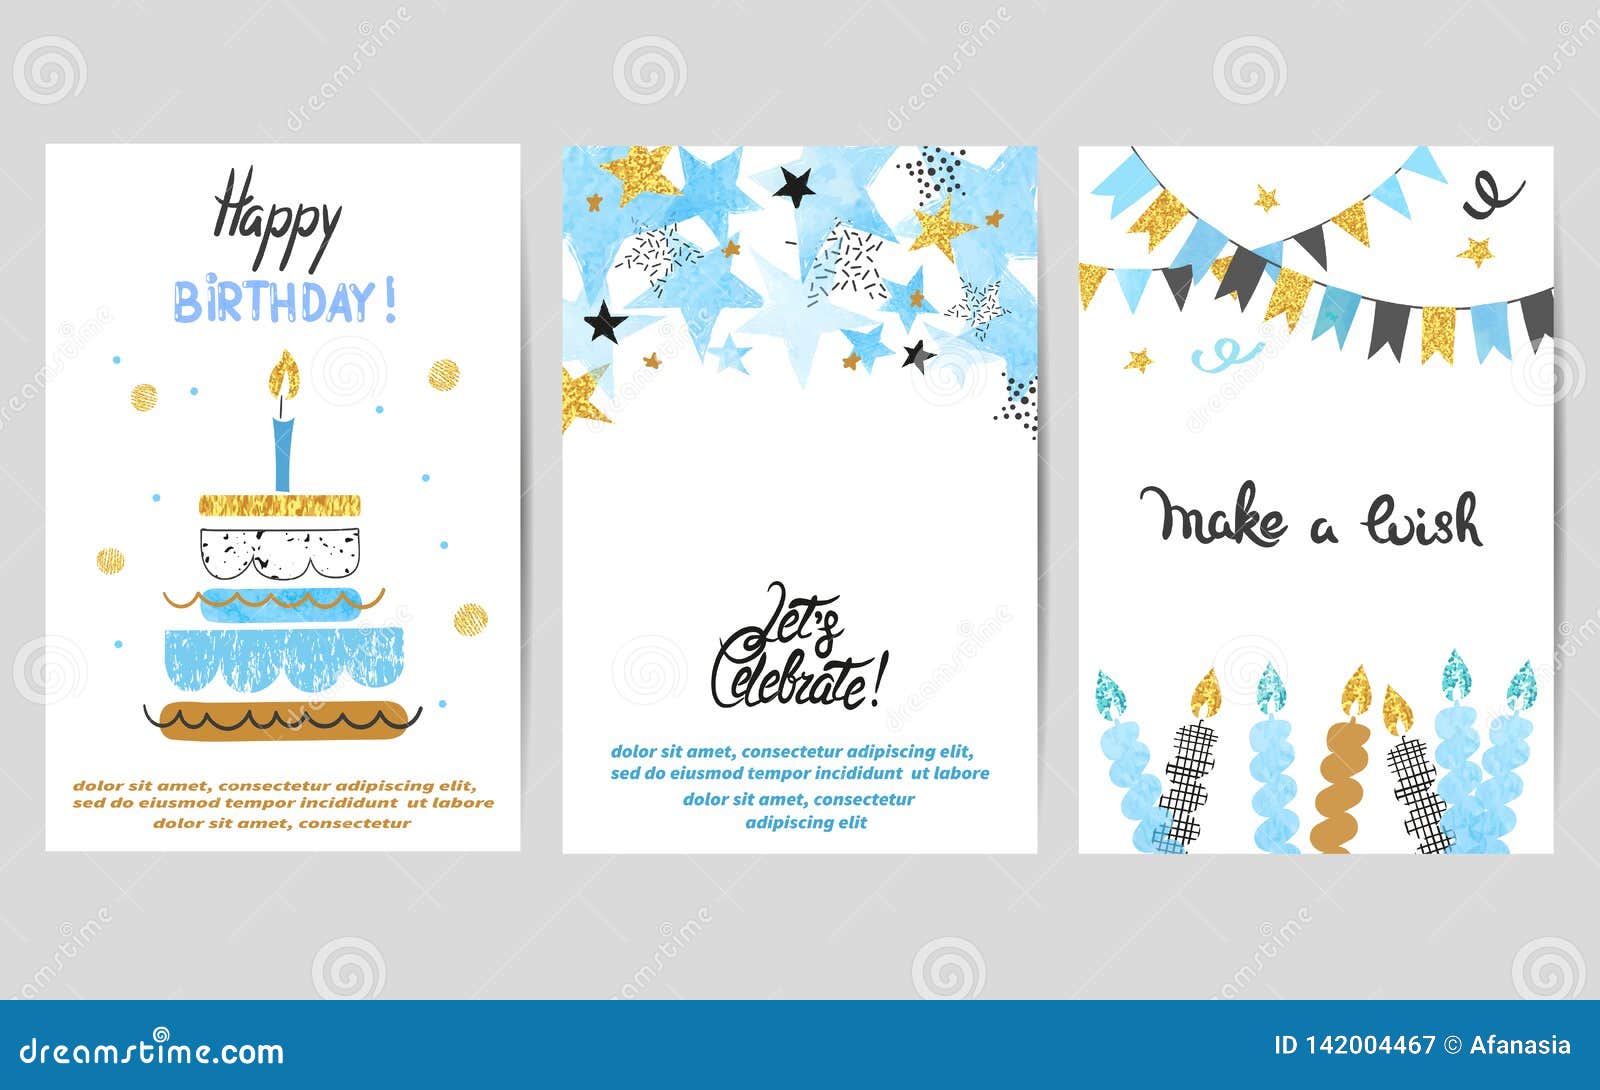 Happy Birthday Cards Set in Blue and Golden Colors. Celebration Intended For Celebrate It Templates Place Cards